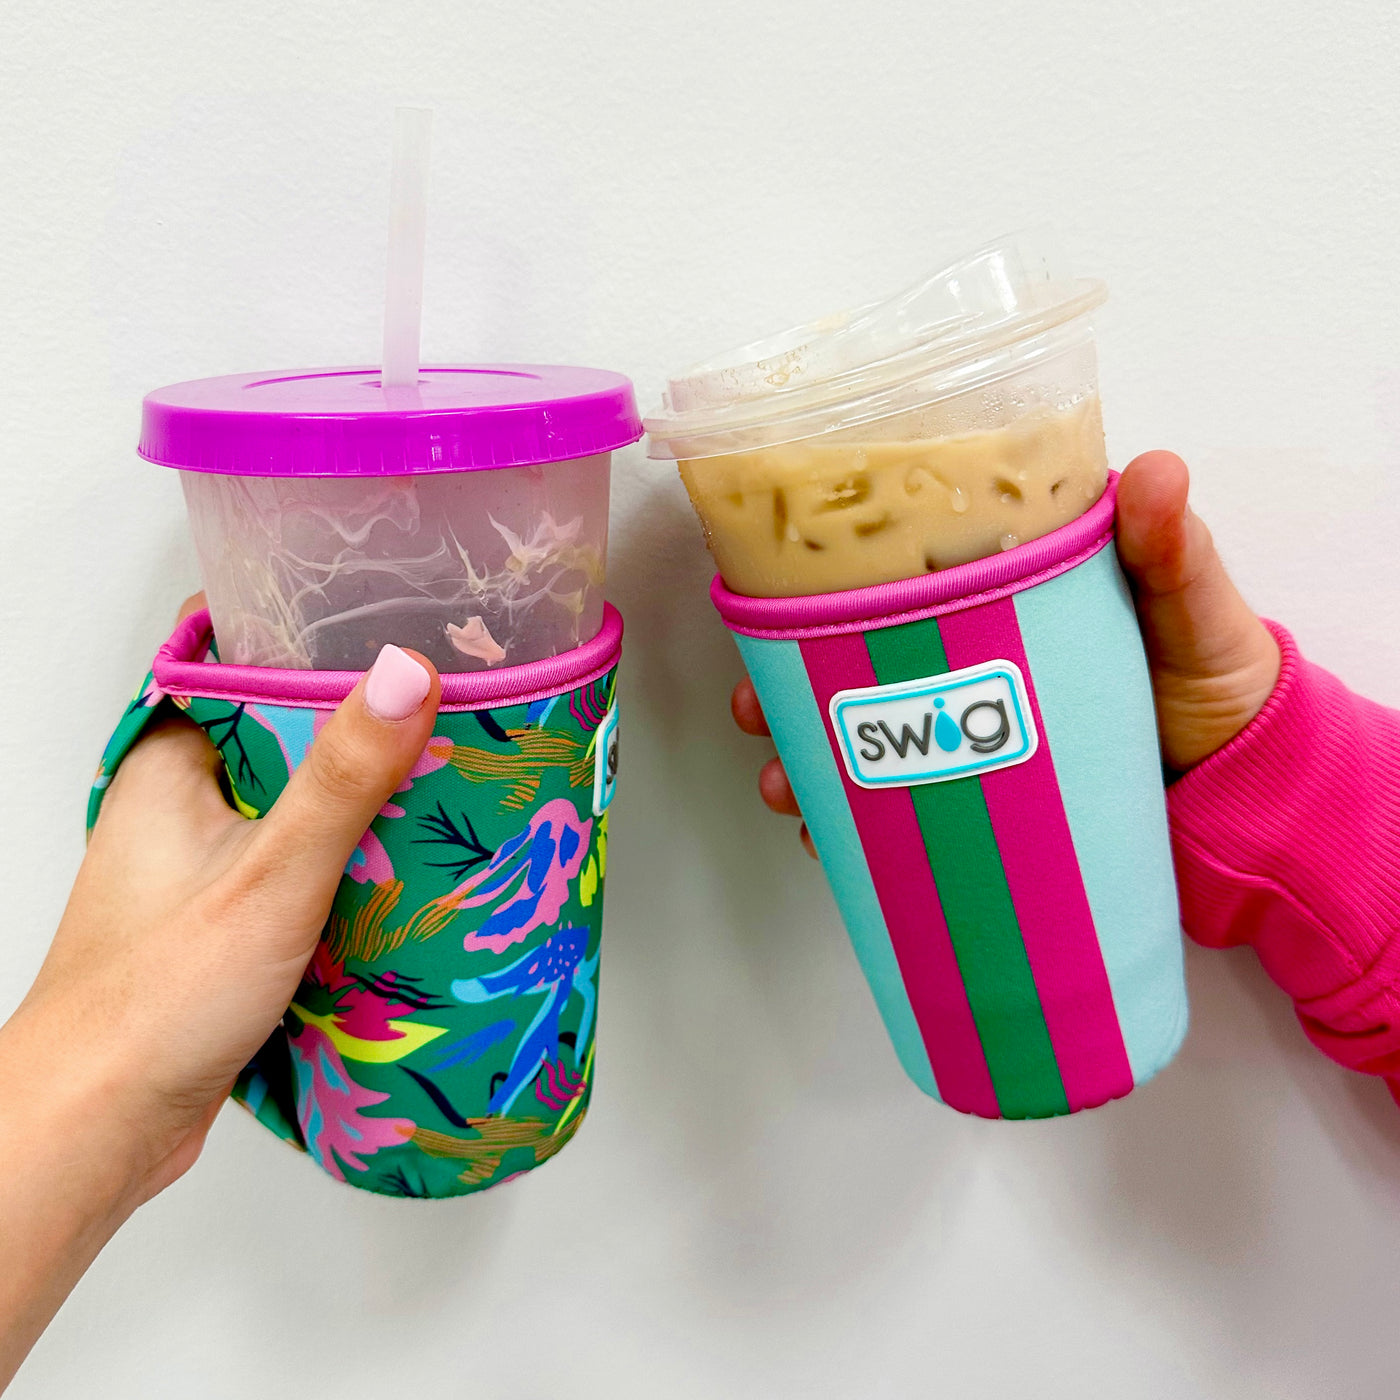 Swig Iced Cup Coolie 22oz